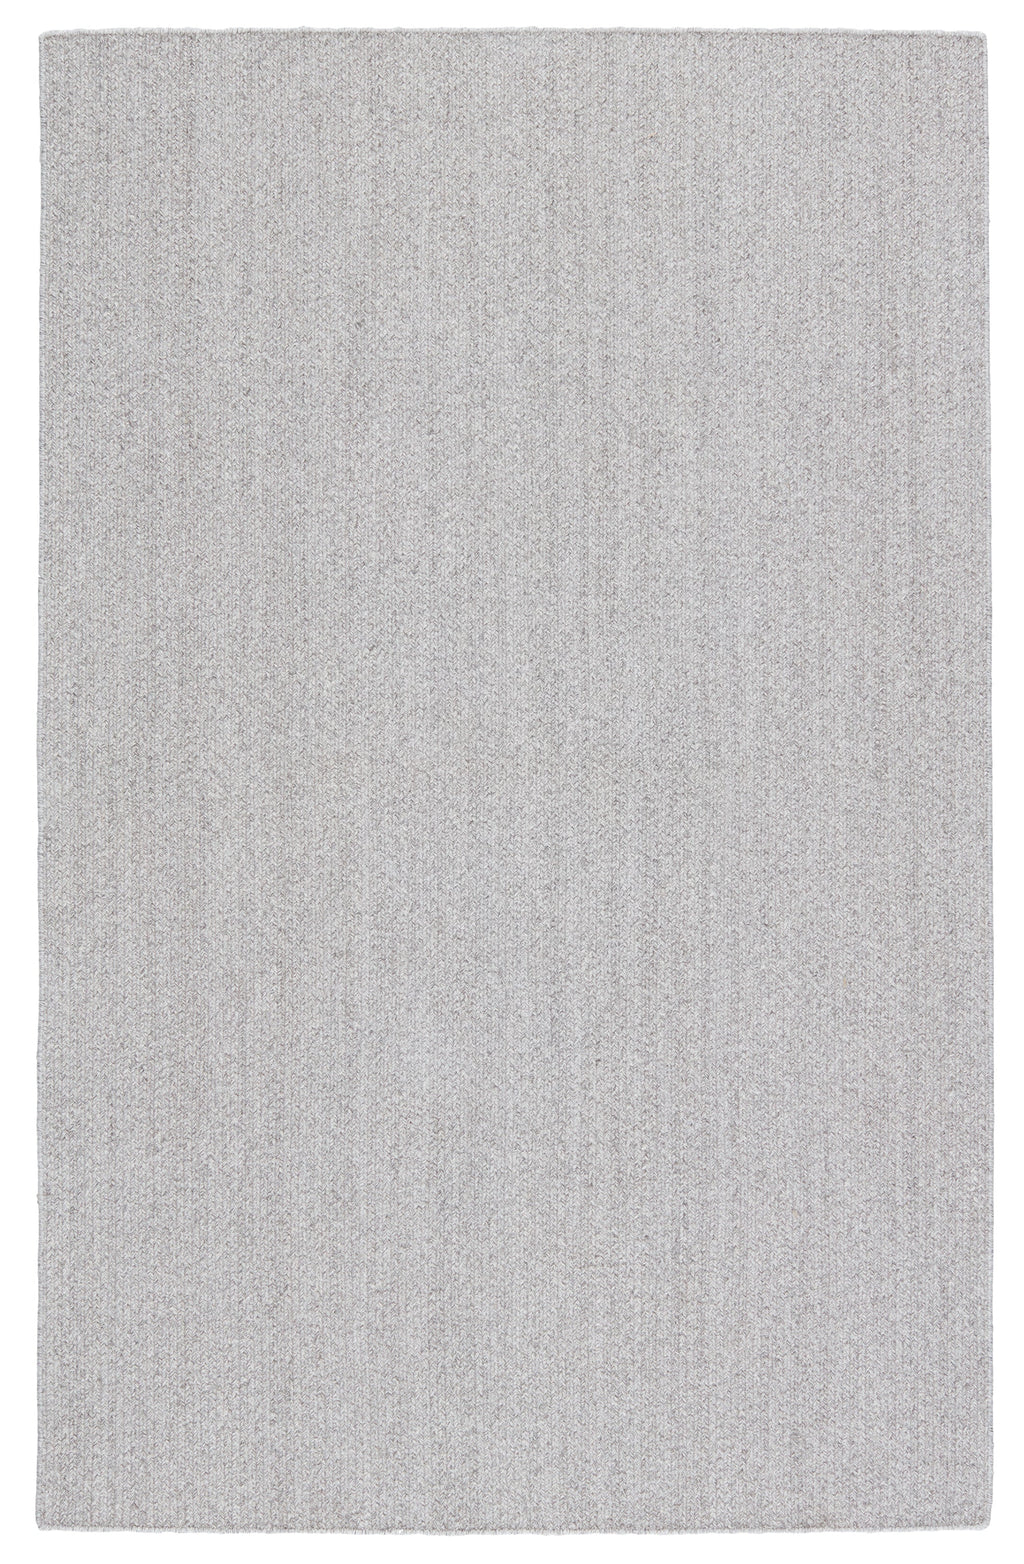 Maracay Indoor/Outdoor Solid Light Grey & White Rug by Jaipur Living